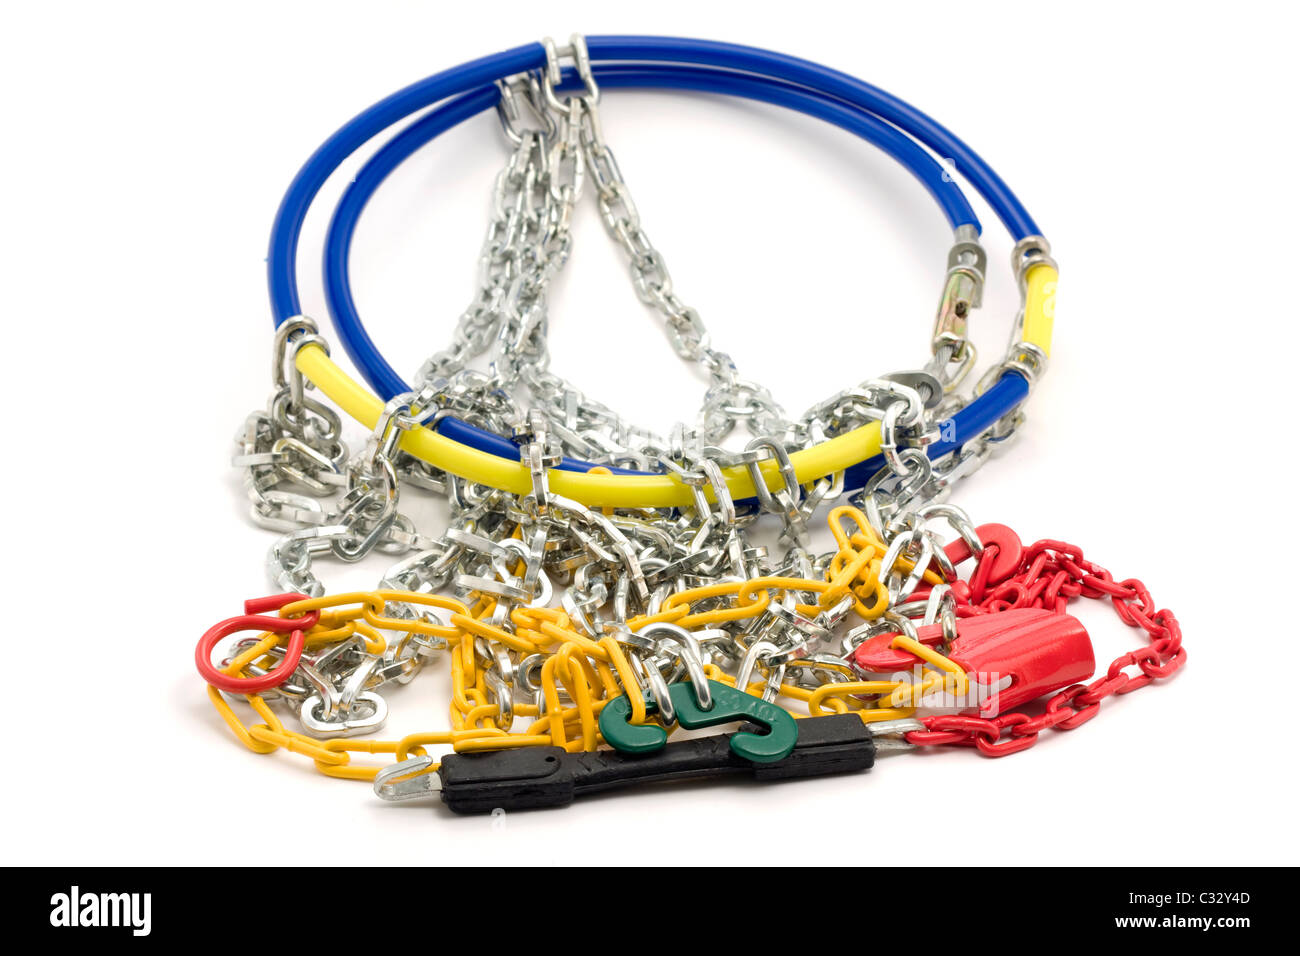 Colorful snow chains Stock Photo